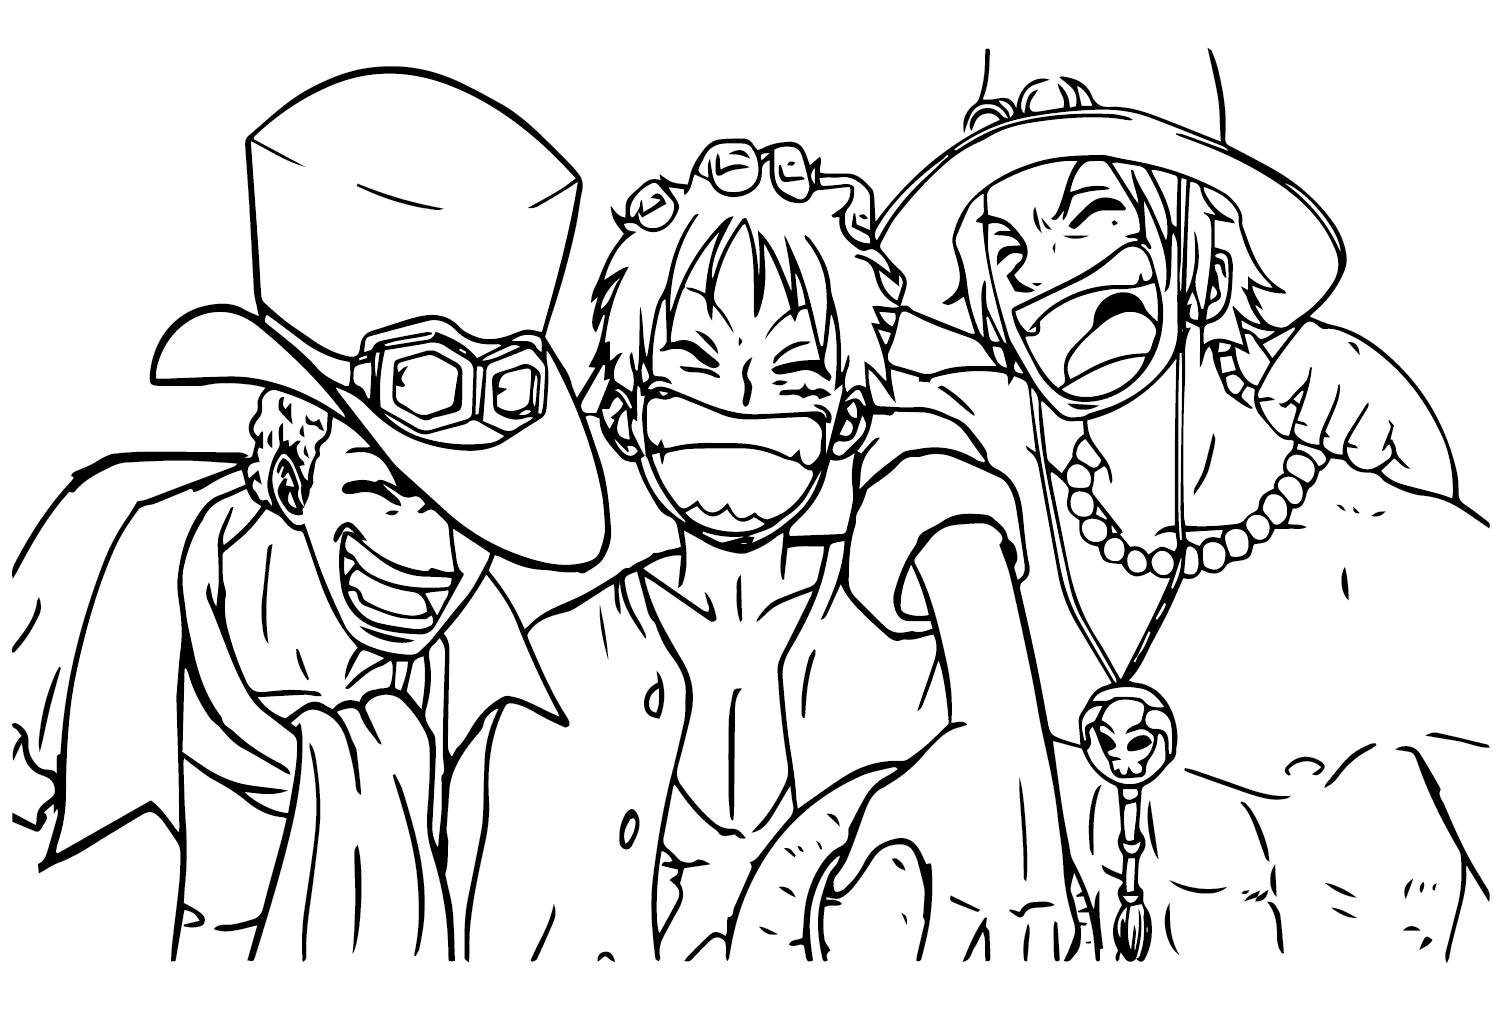 Sabo, Luffy and Ace to Color from Portgas D. Ace